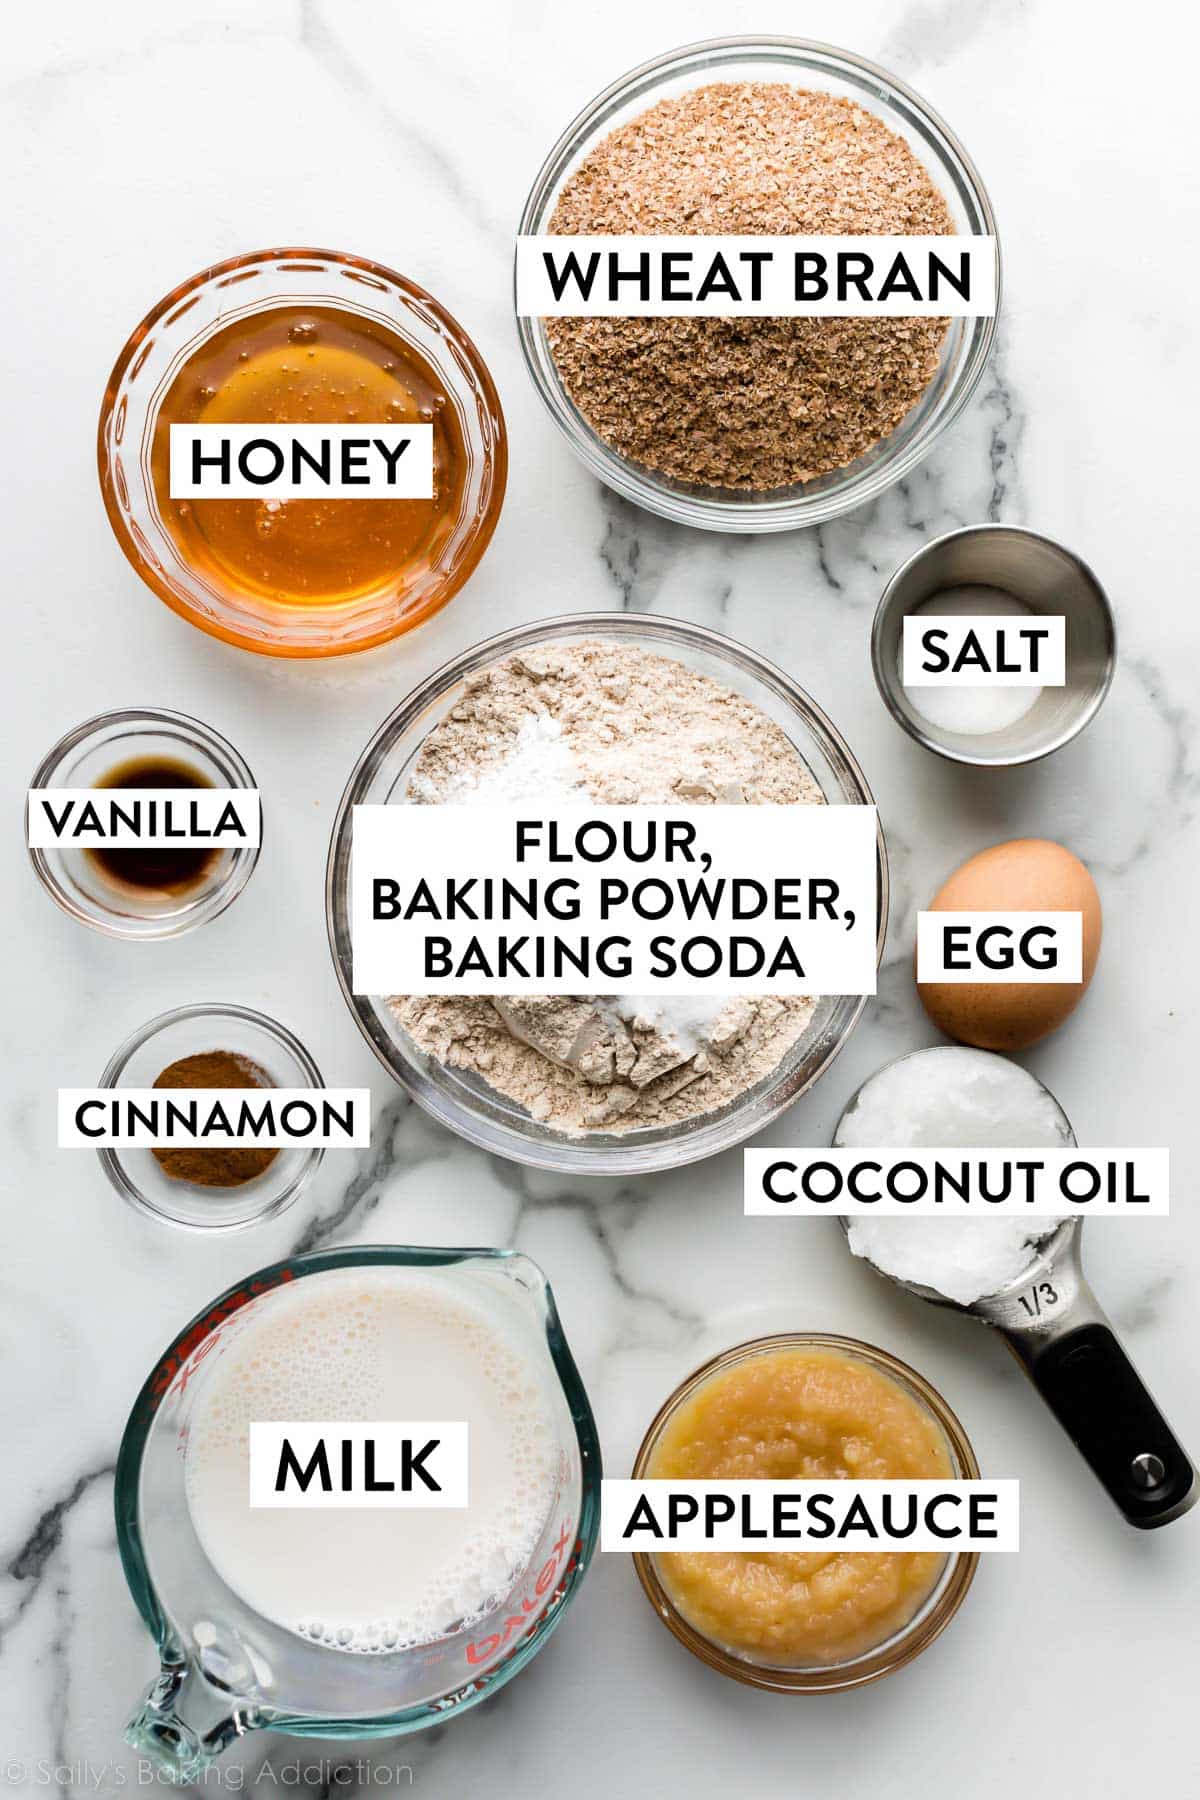 ingredients on marble counter including flour, applesauce, coconut oil, egg, milk, honey, and more.